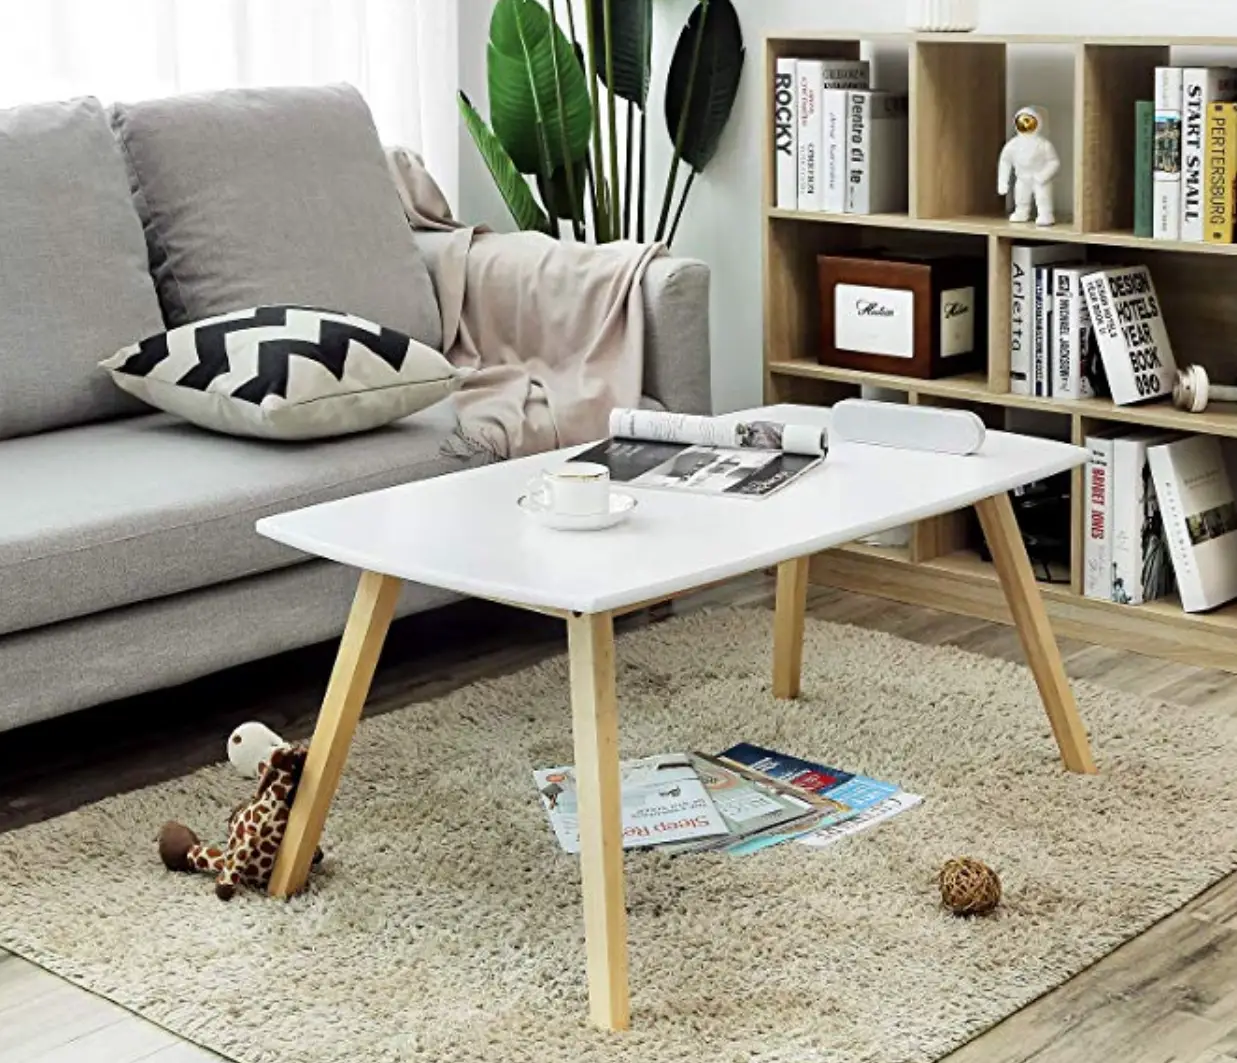 Enter for your chance to win a Songmics Coffee/Cocktail Table. This coffee table is inspired by nature and a love of simplicity. It has clean lines and a simple silhouette. And the white top and light colored solid wood legs means the colors will go with just about any decor.